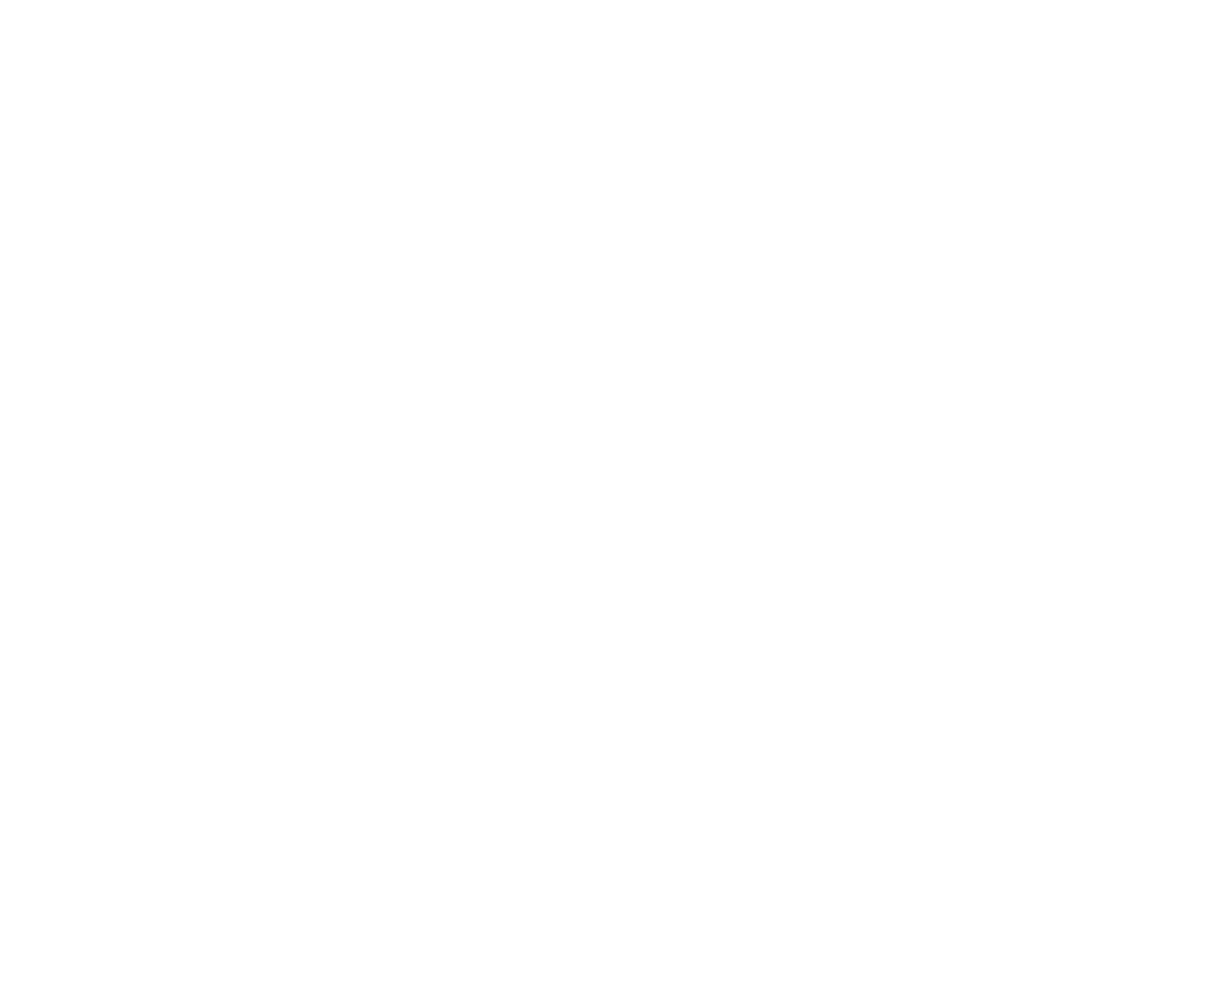 The Roundtable logo